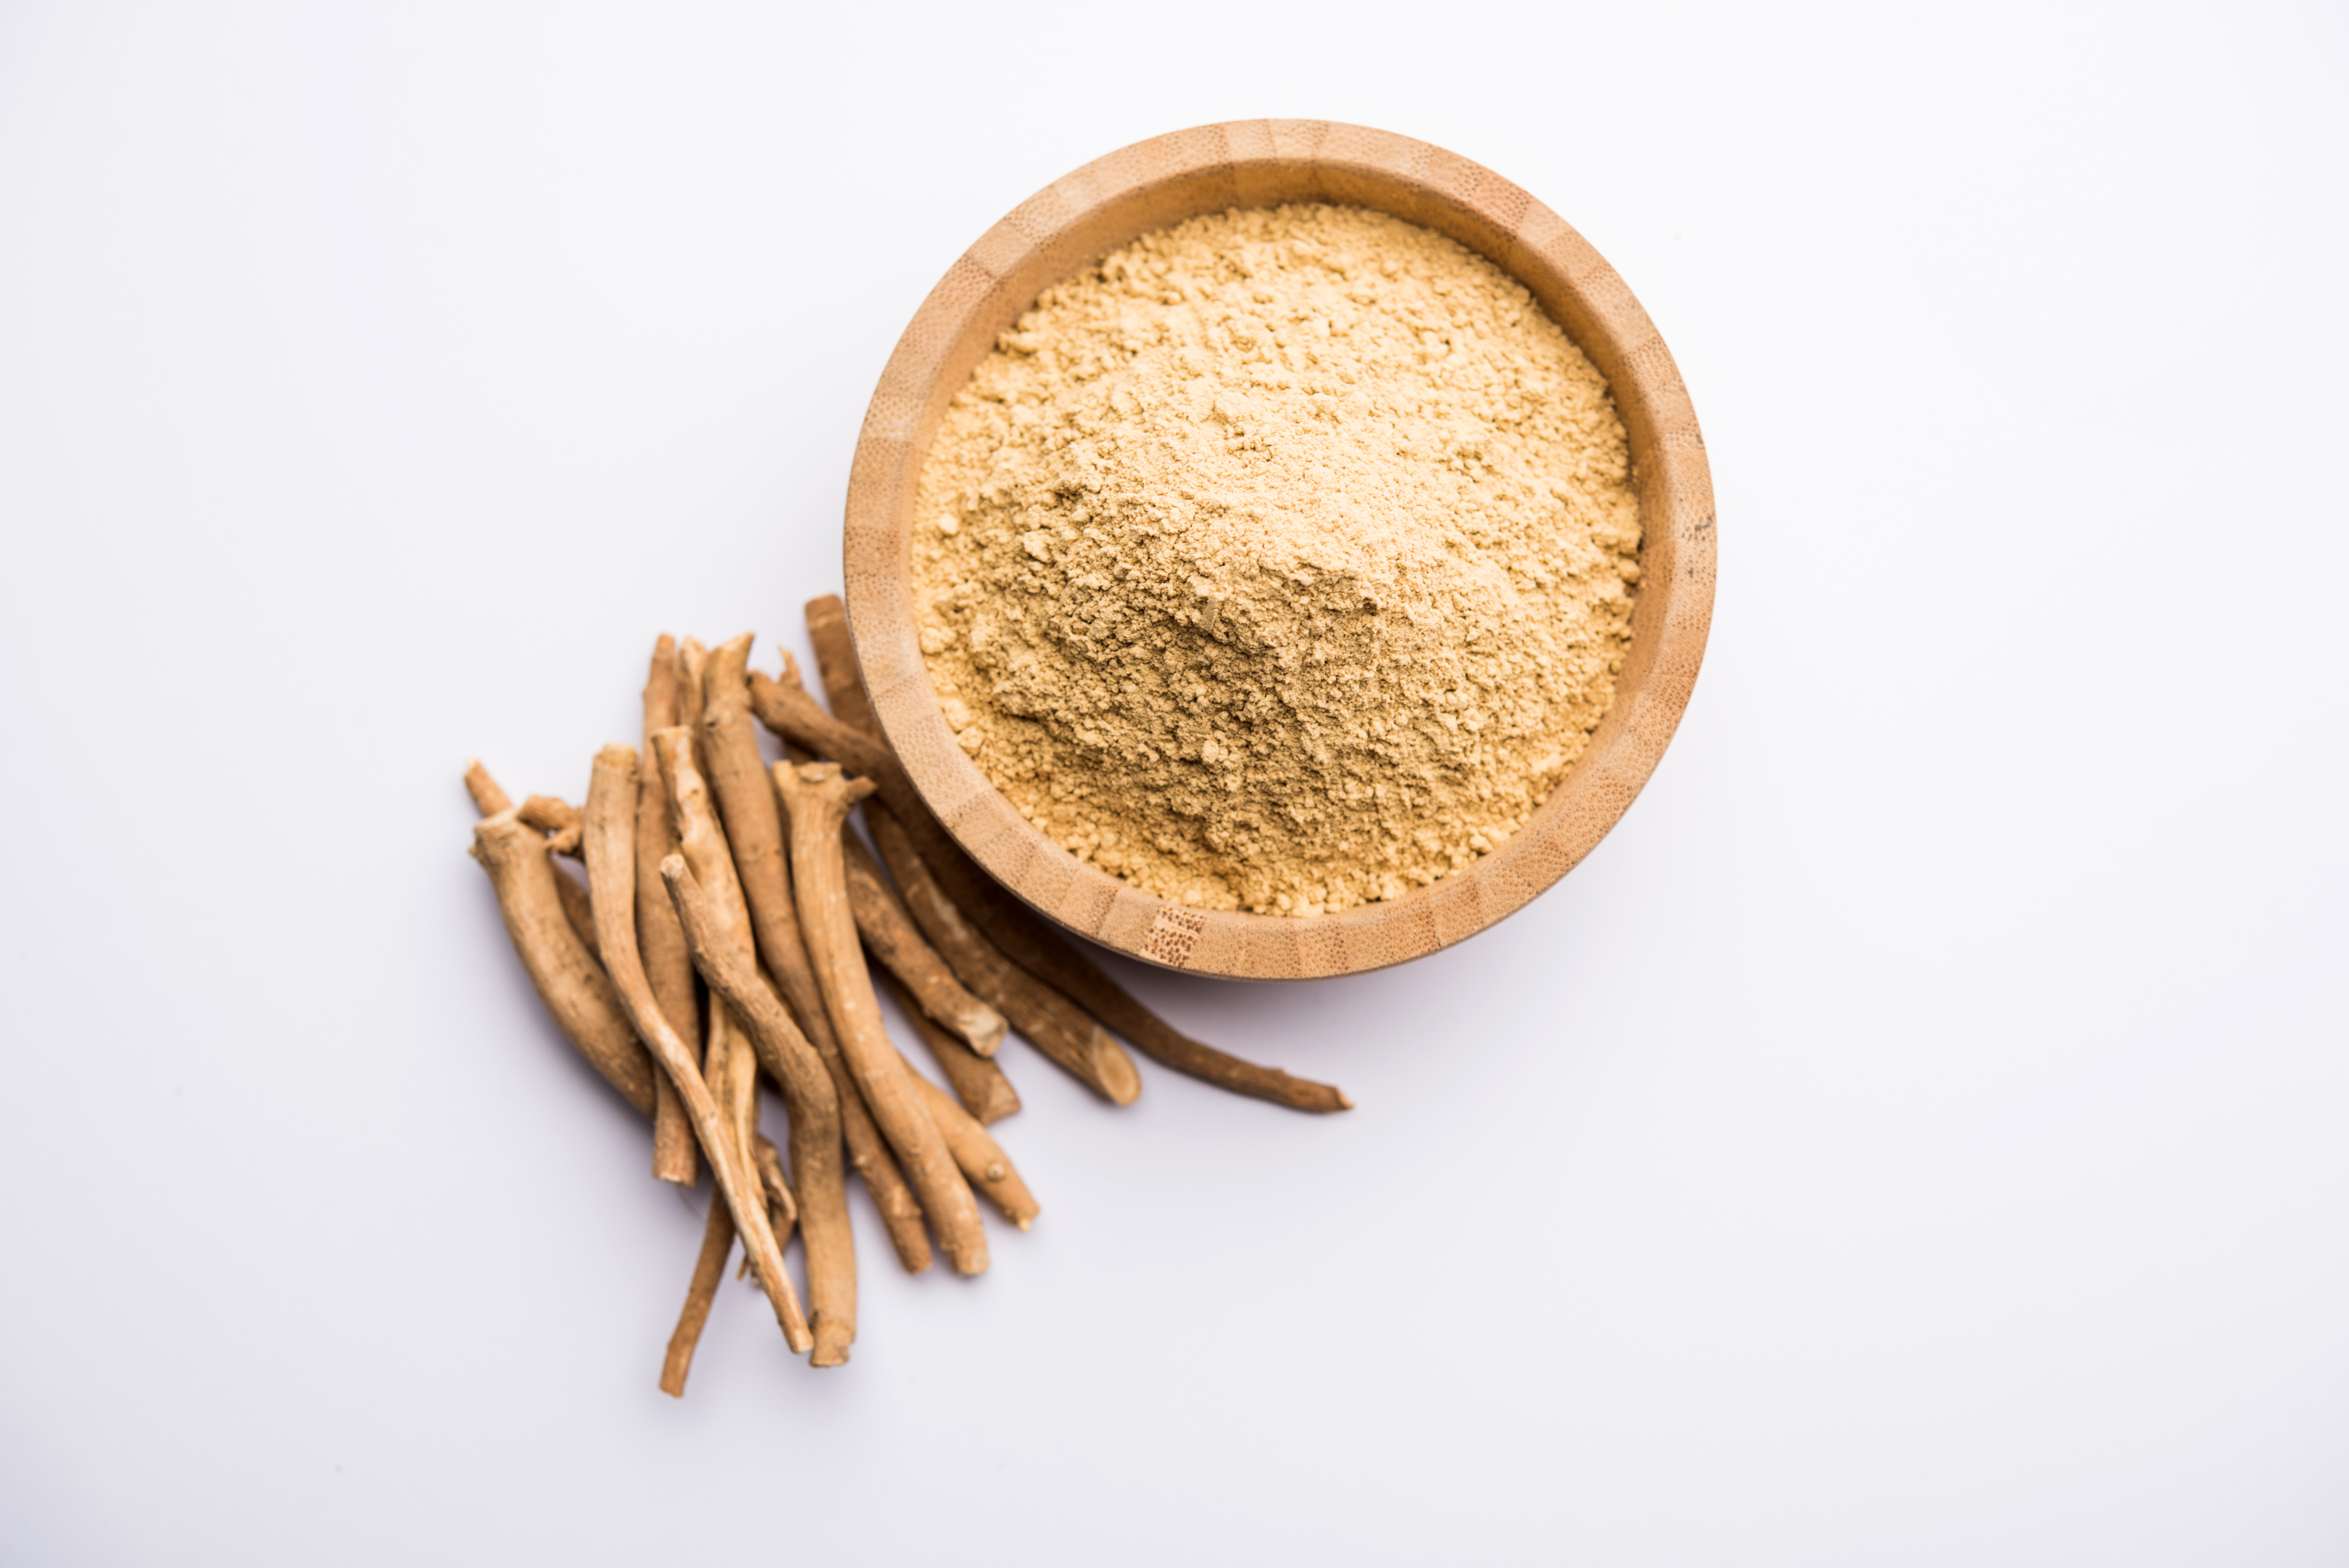 Ashwagandha is used in traditional Indian medicine for various health benefits.